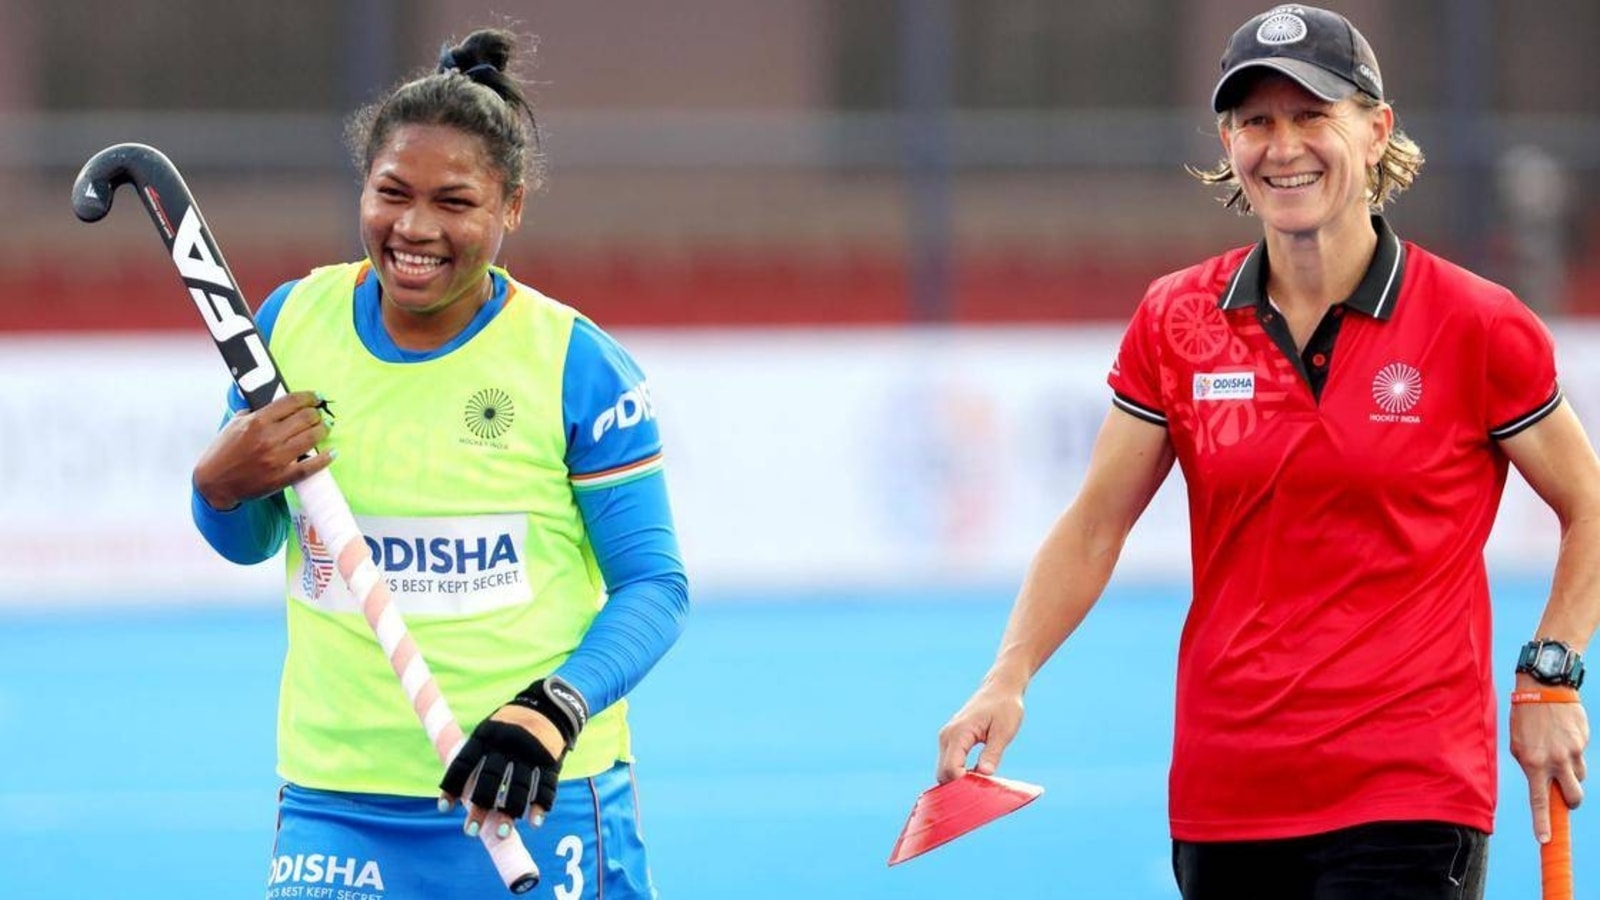 Asia Cup 2022: India Women's Hockey Team Needs To Live Up To Expectations,  Says Savita Punia